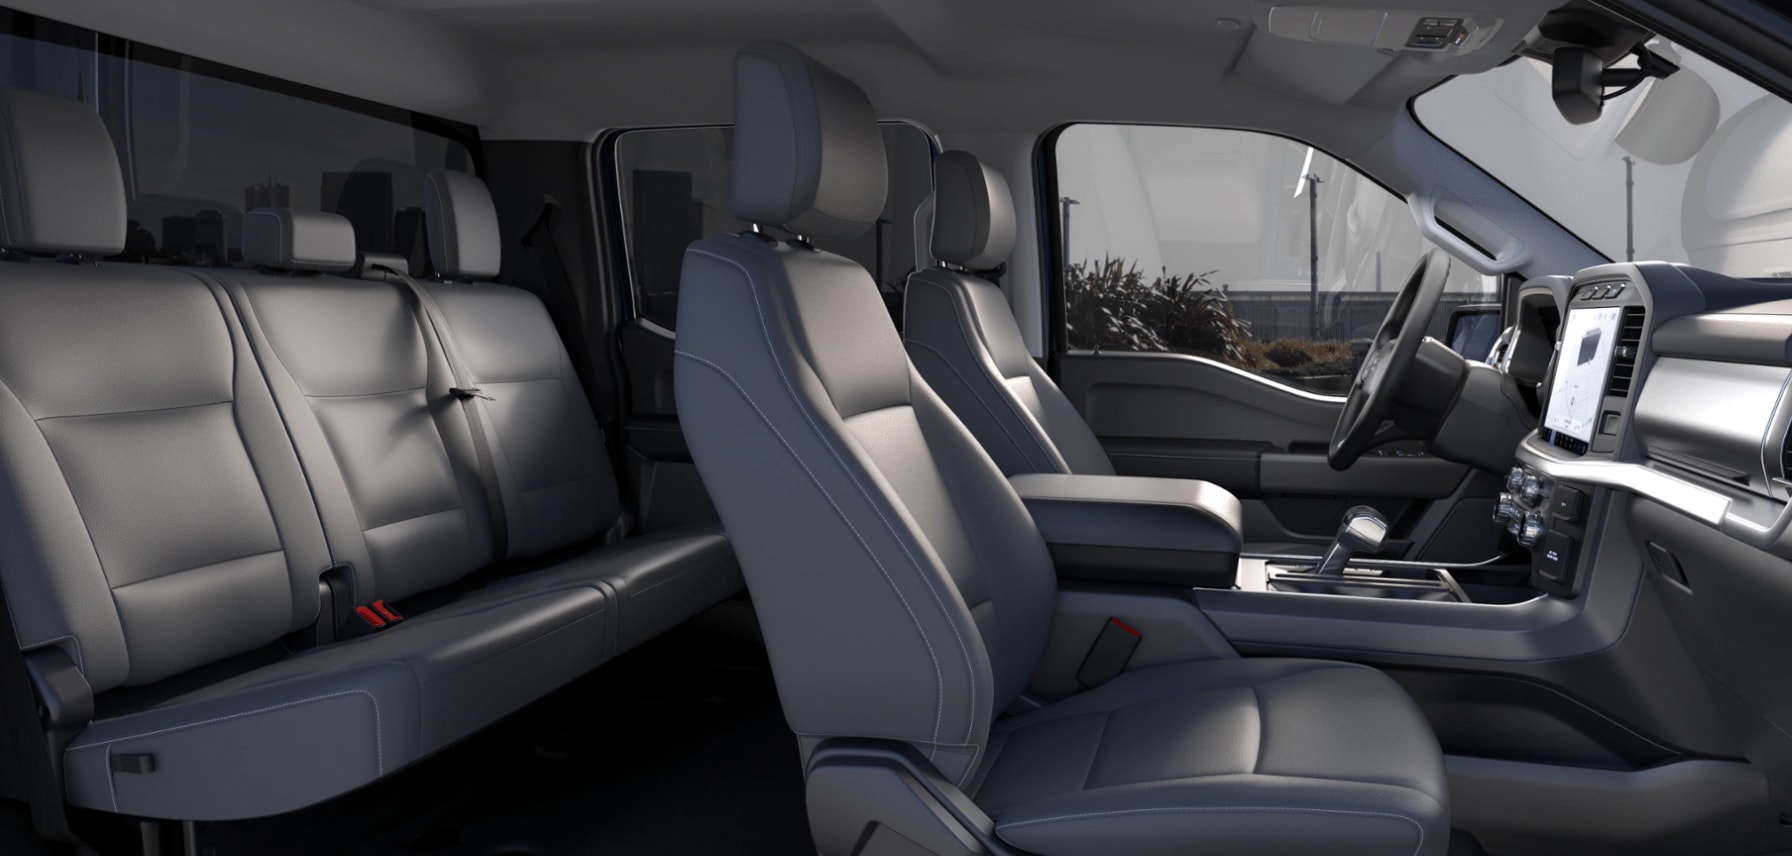 A roomy cabin of the F-150 Lightning is shown with gray leather seating. Two seats up front are on either side of a wide console, a touchscreen interface is in the dash, and a bench seat for three is in the back